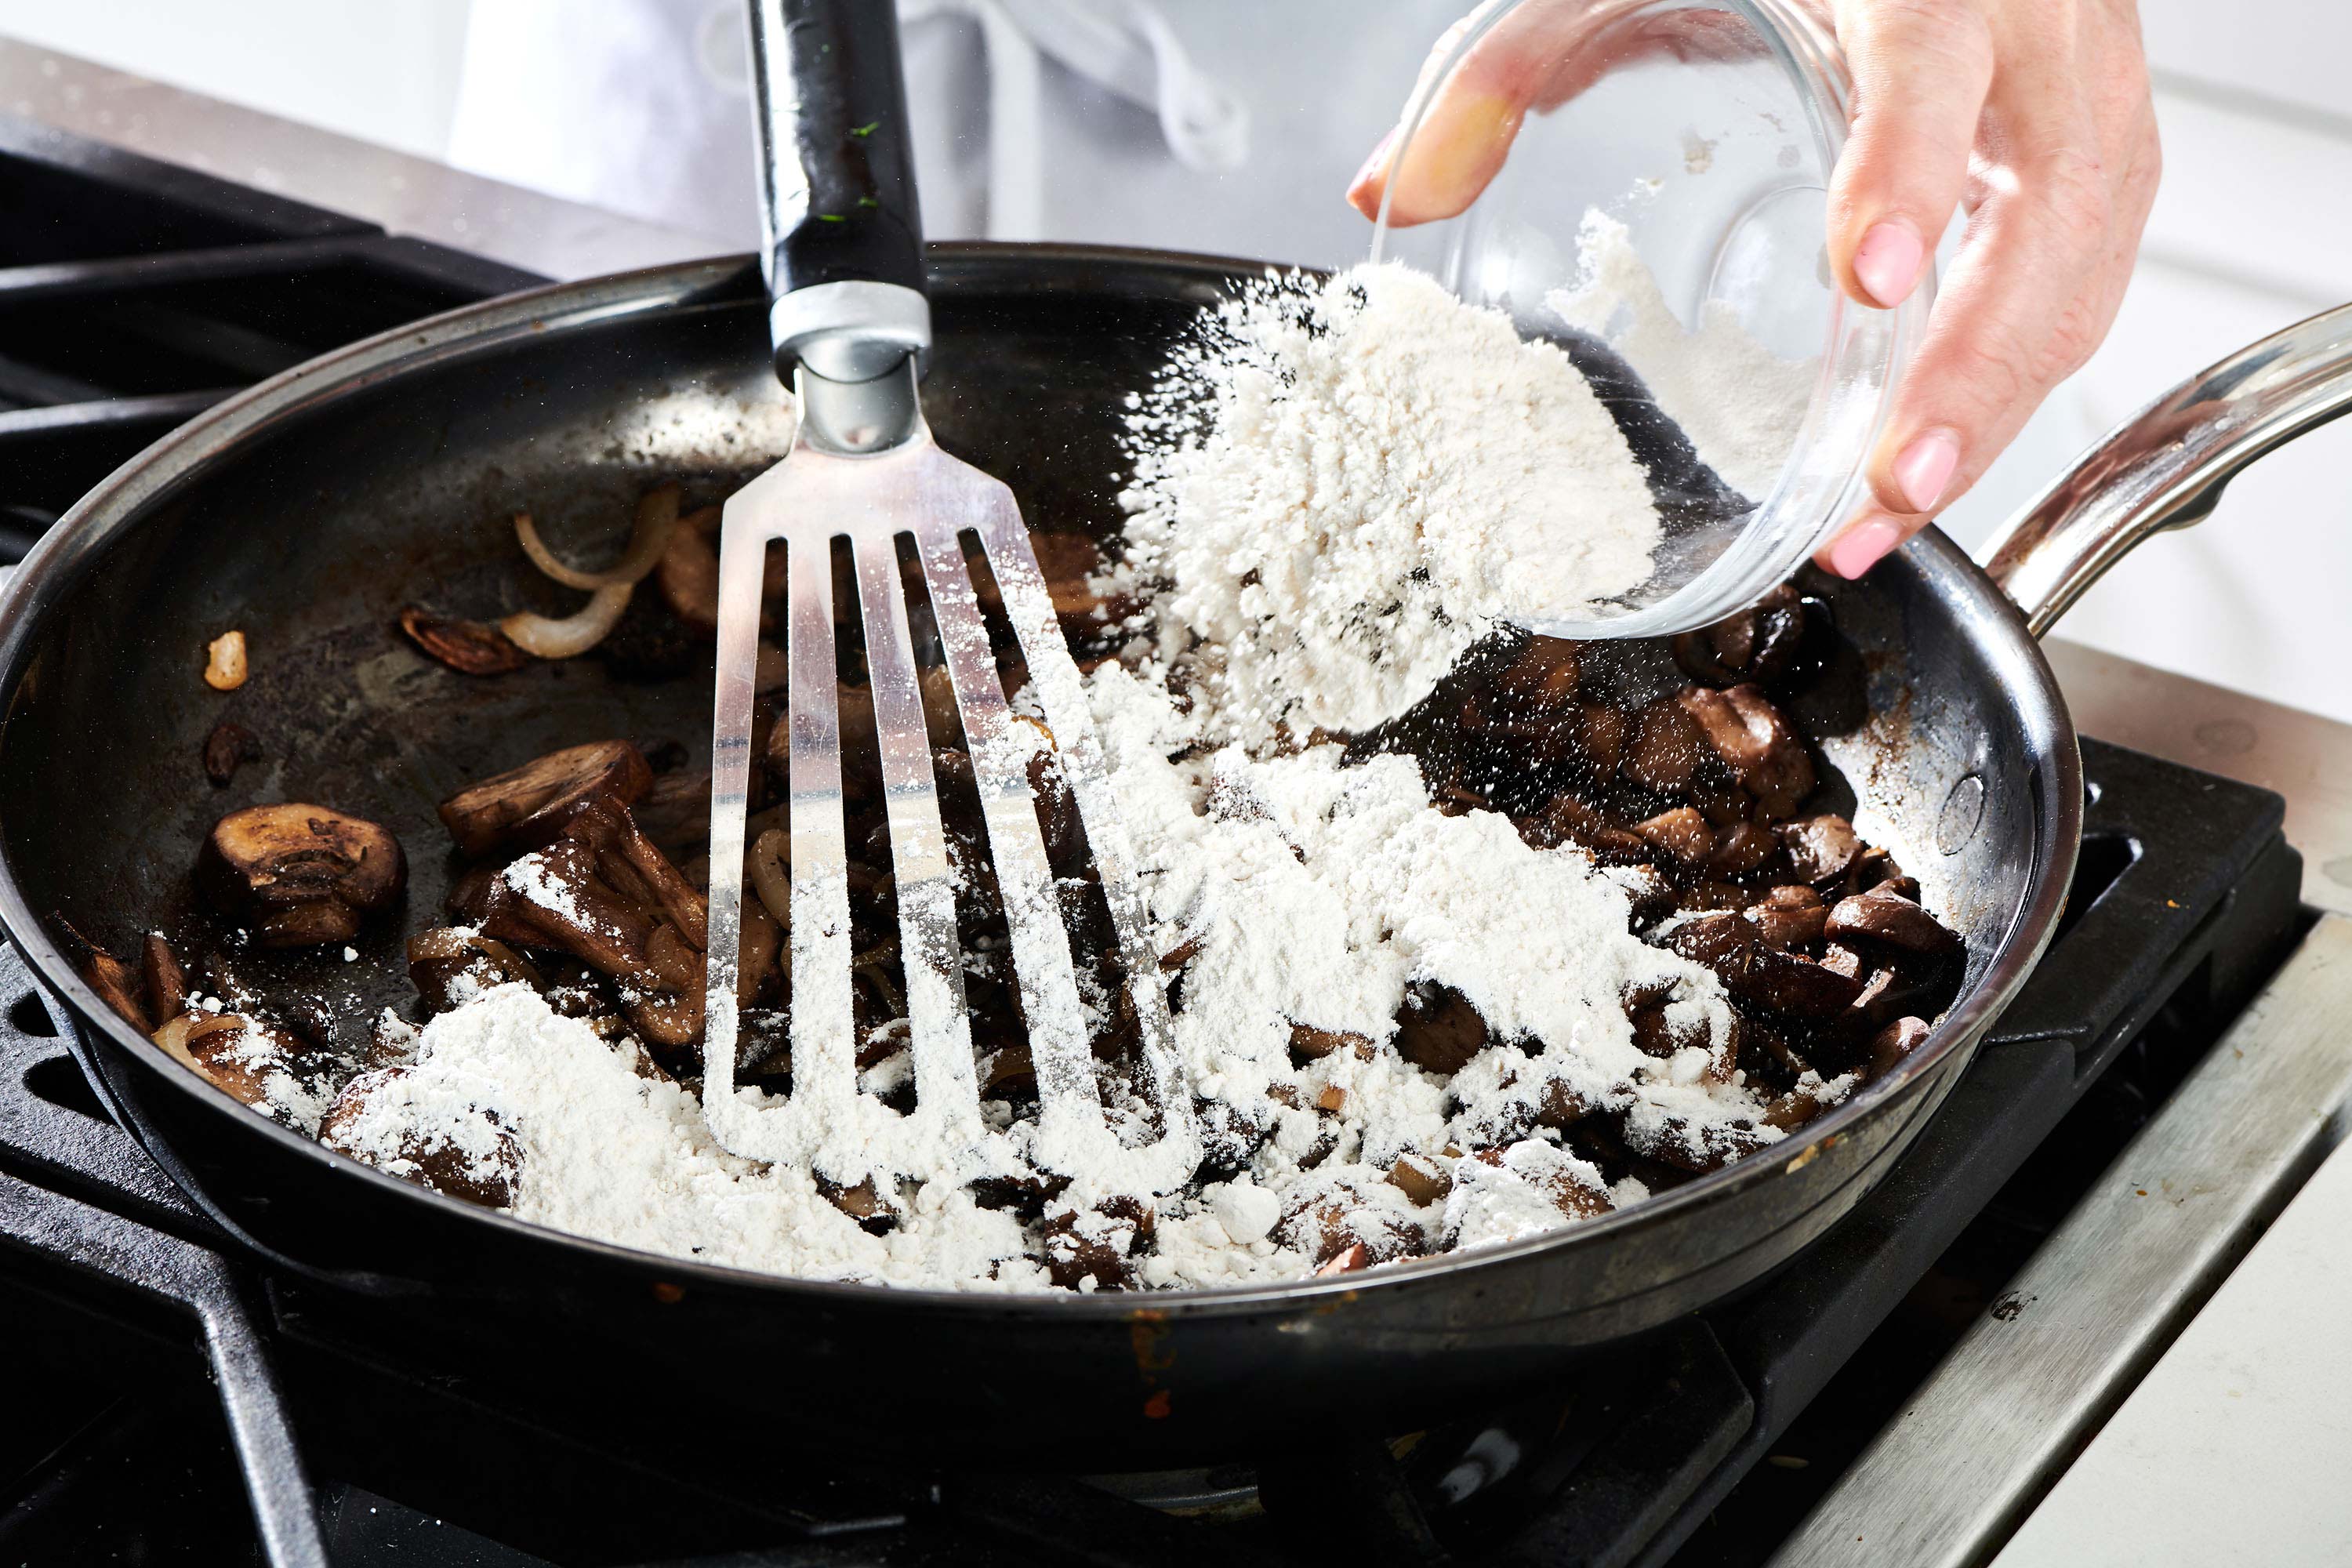 Woman sprinkling flour into a skillet with mushrooms and shallots.